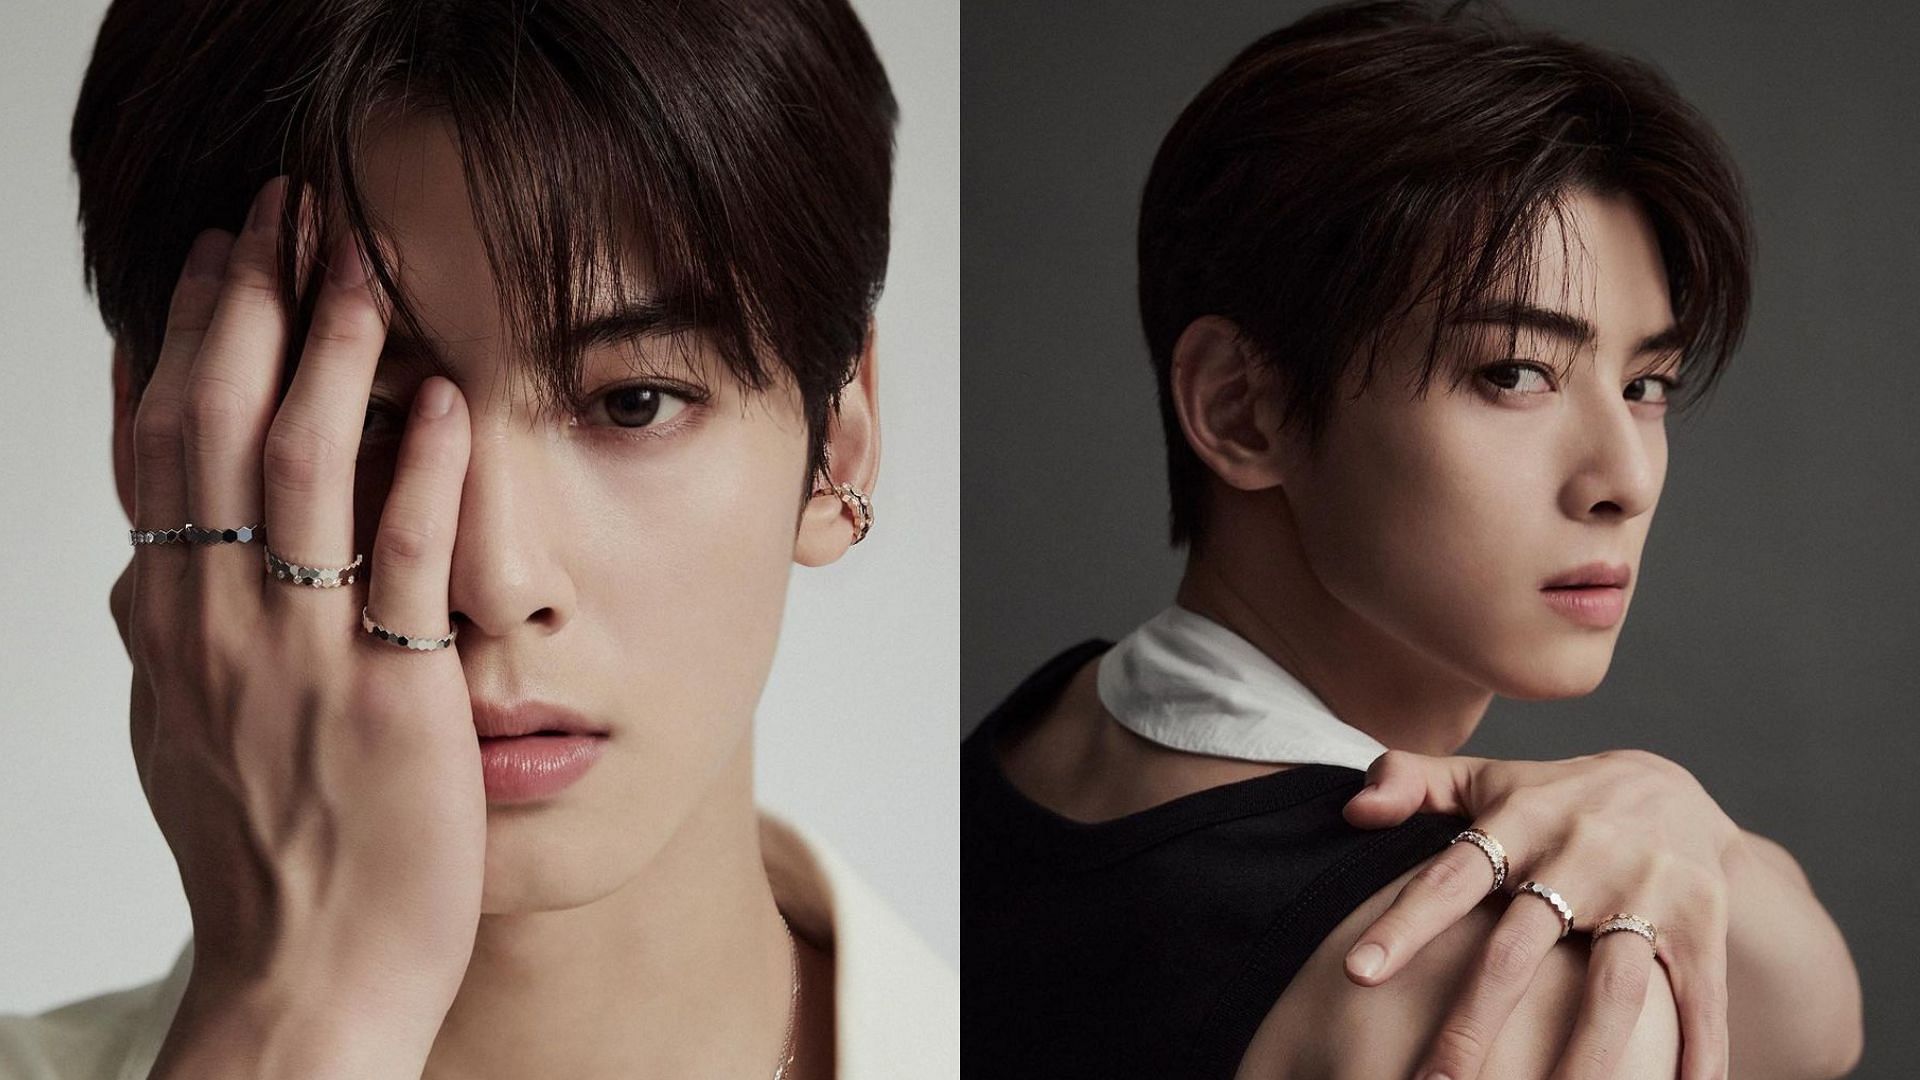 ASTRO's Cha Eun Woo makes jaws drop with his visuals and